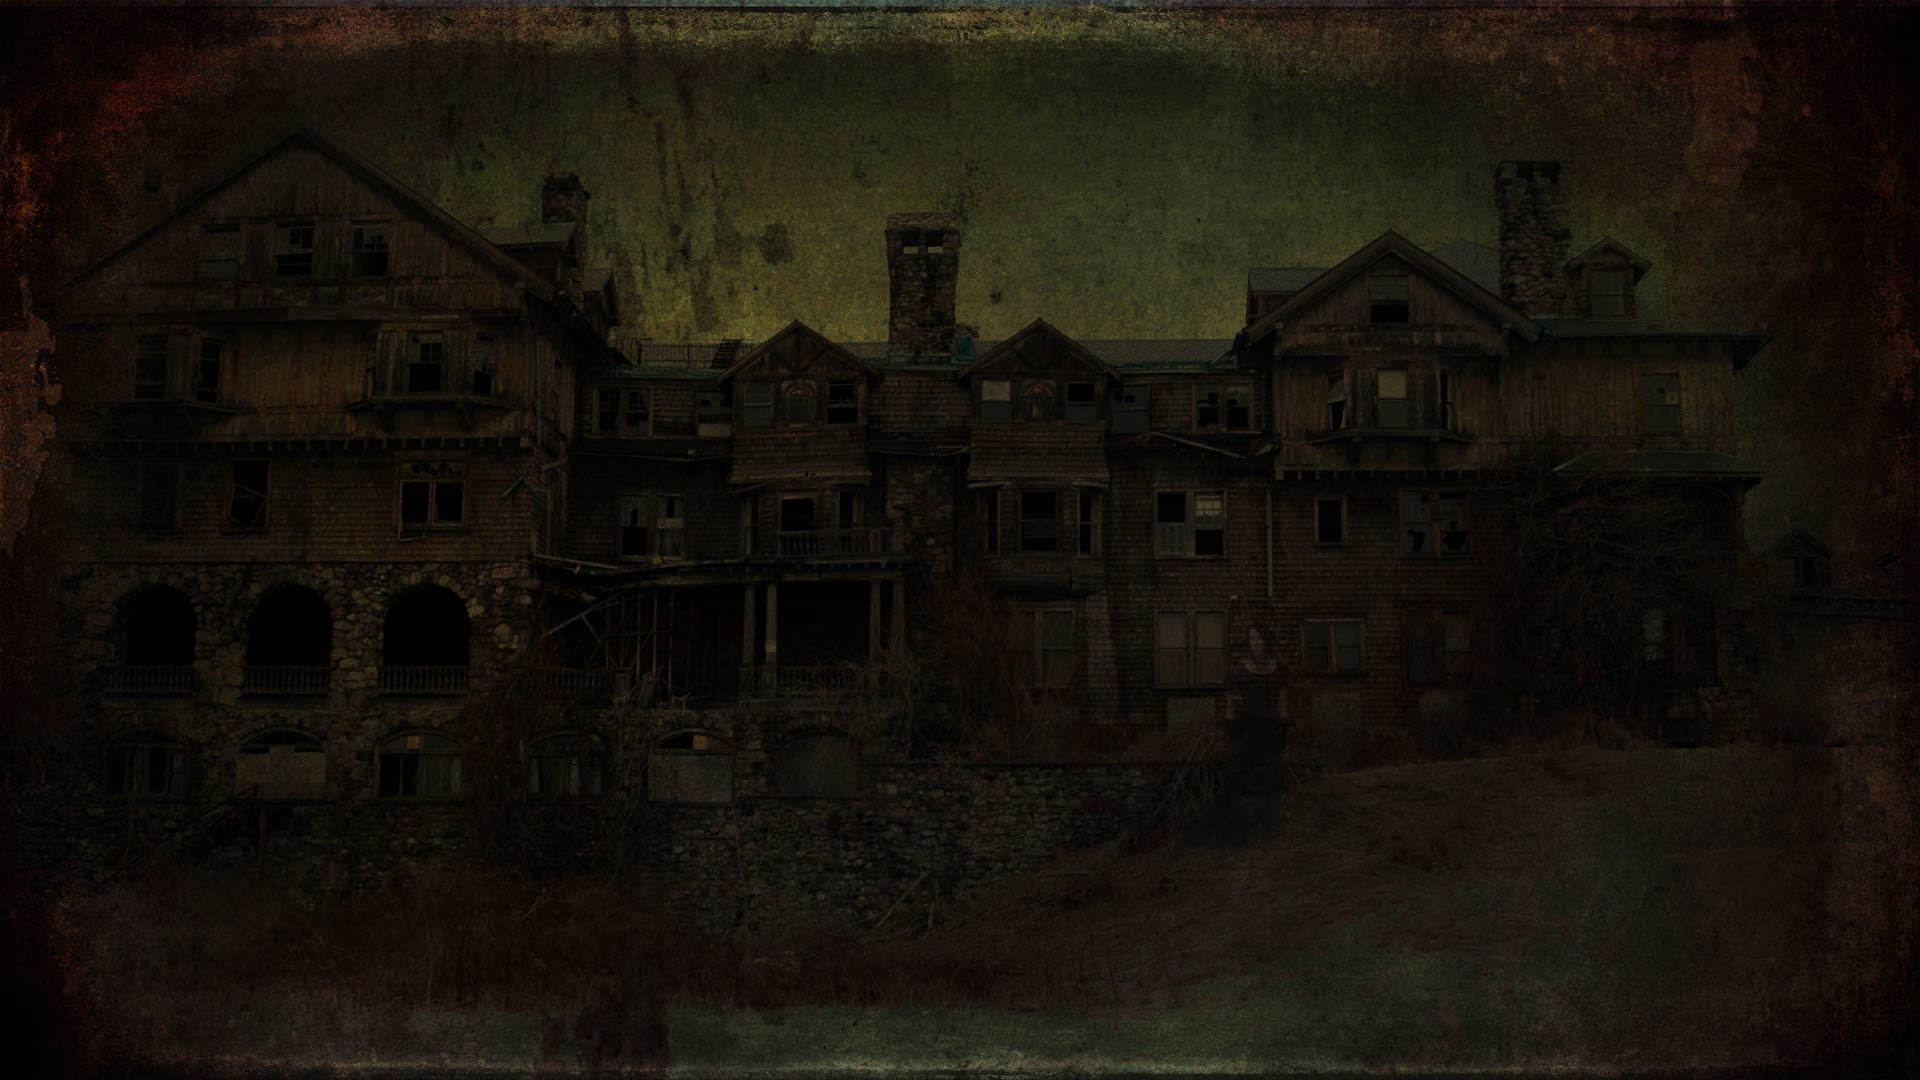 1920x1080 ... haunted house wallpapers haunted house stock photos ...